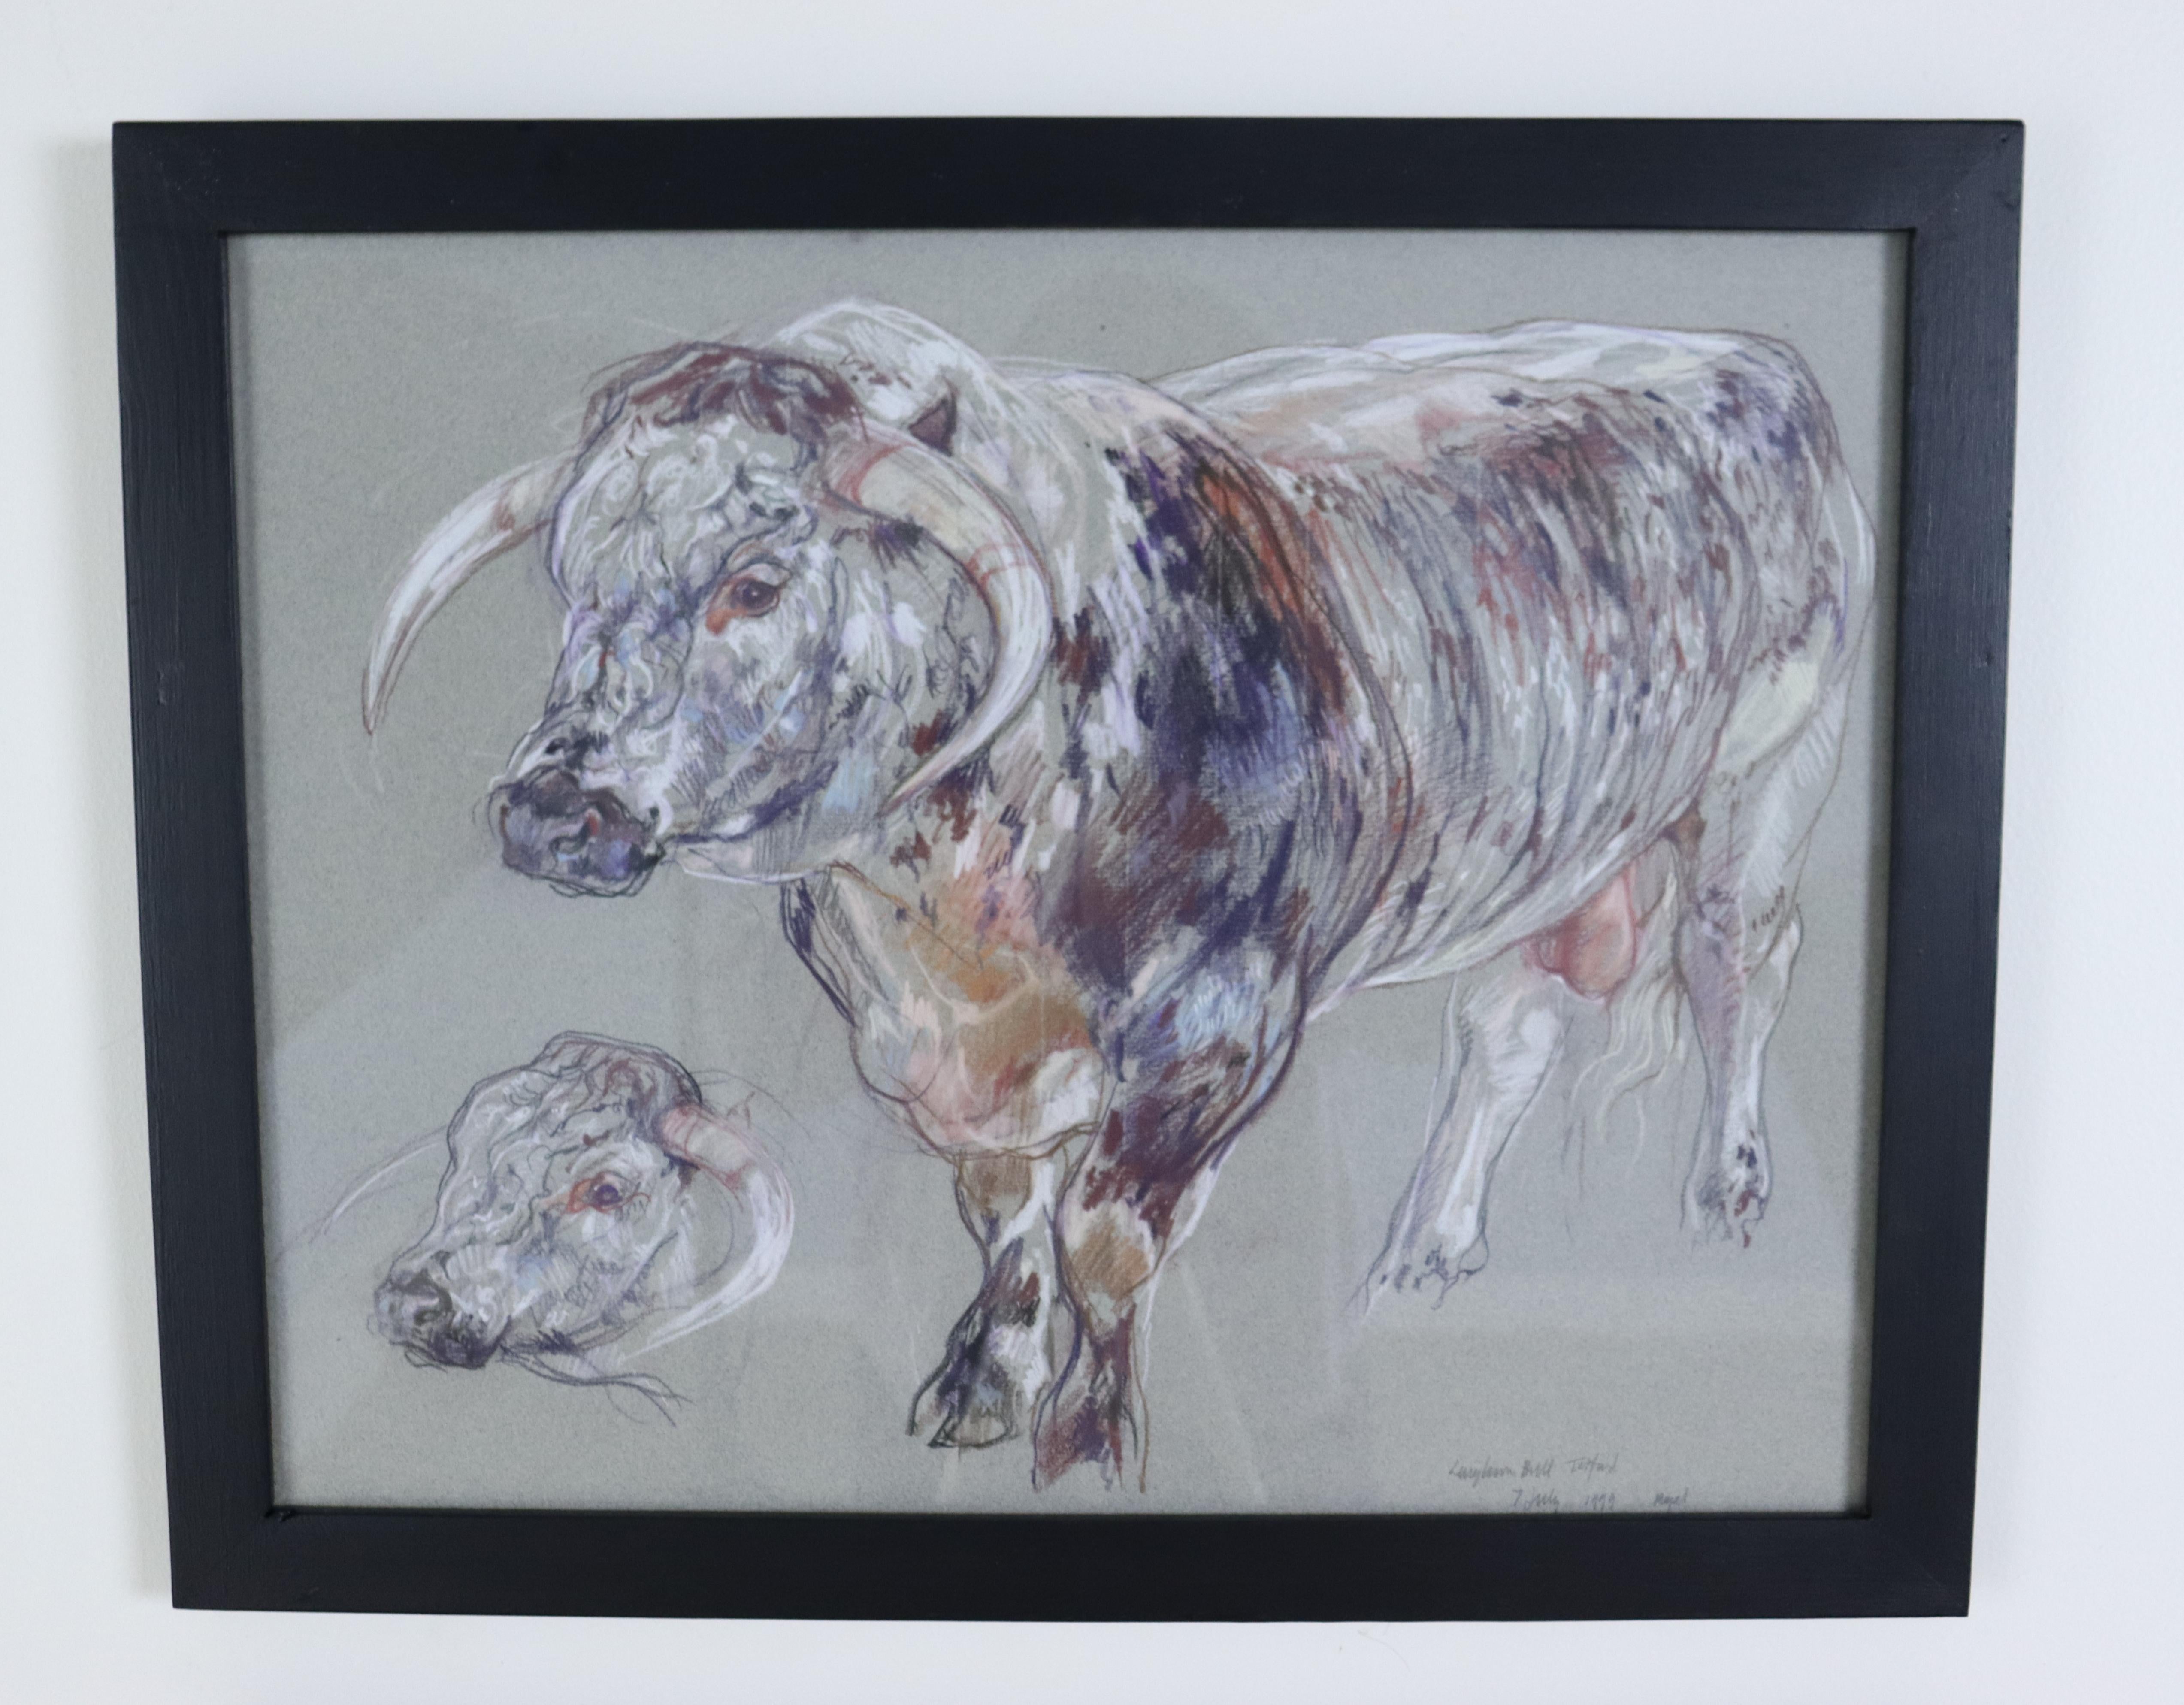 A pair of cow studies in charcoal and pastel, done by Leslie Charlotte Benenson (1941-2018), deceased Royal Academy artist in 1999. These appear to be, from the top, a Longhorn bull and his mate, a Longhorn cow. Highly decorative, they are slightly